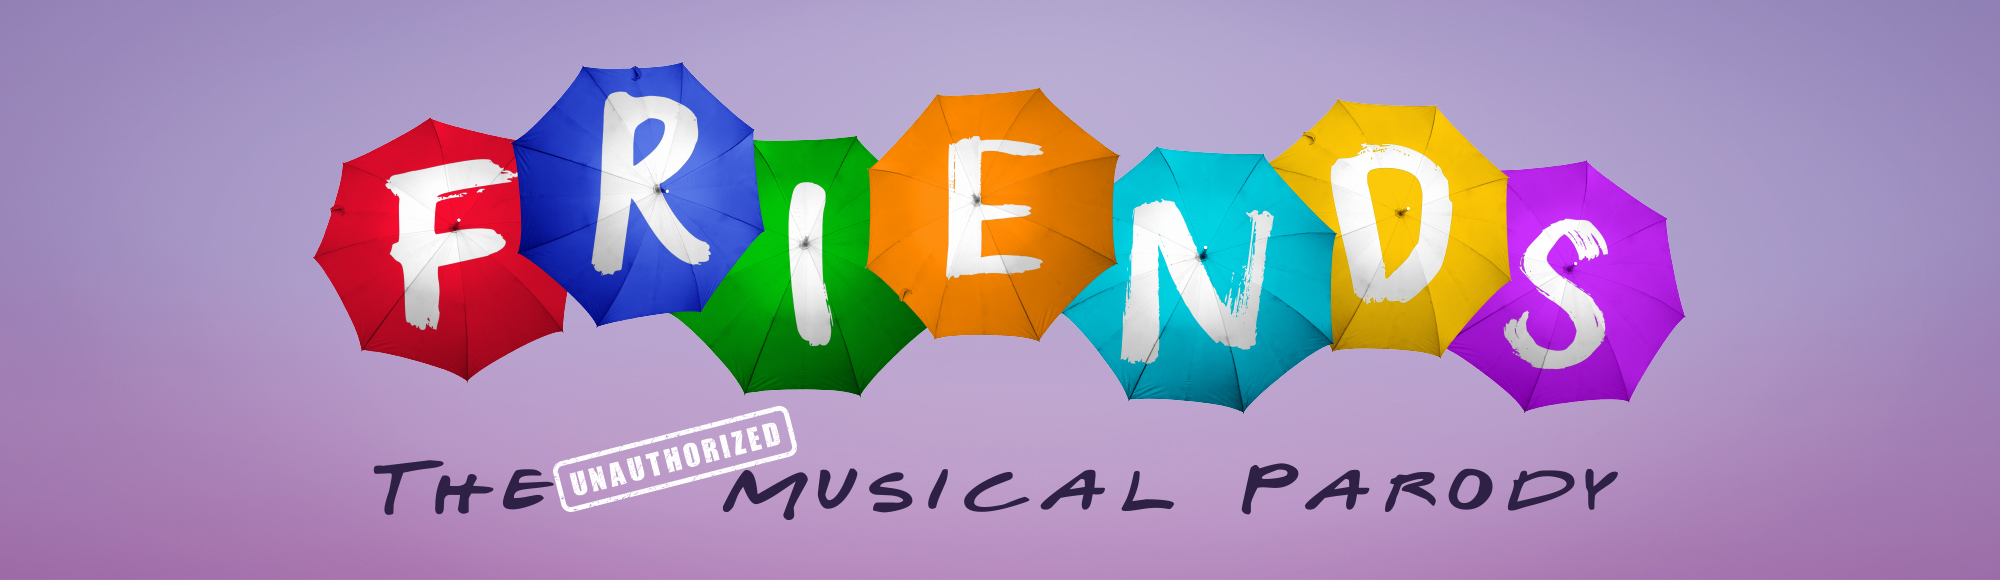 FRIENDS! The Unauthorized Musical Parody show